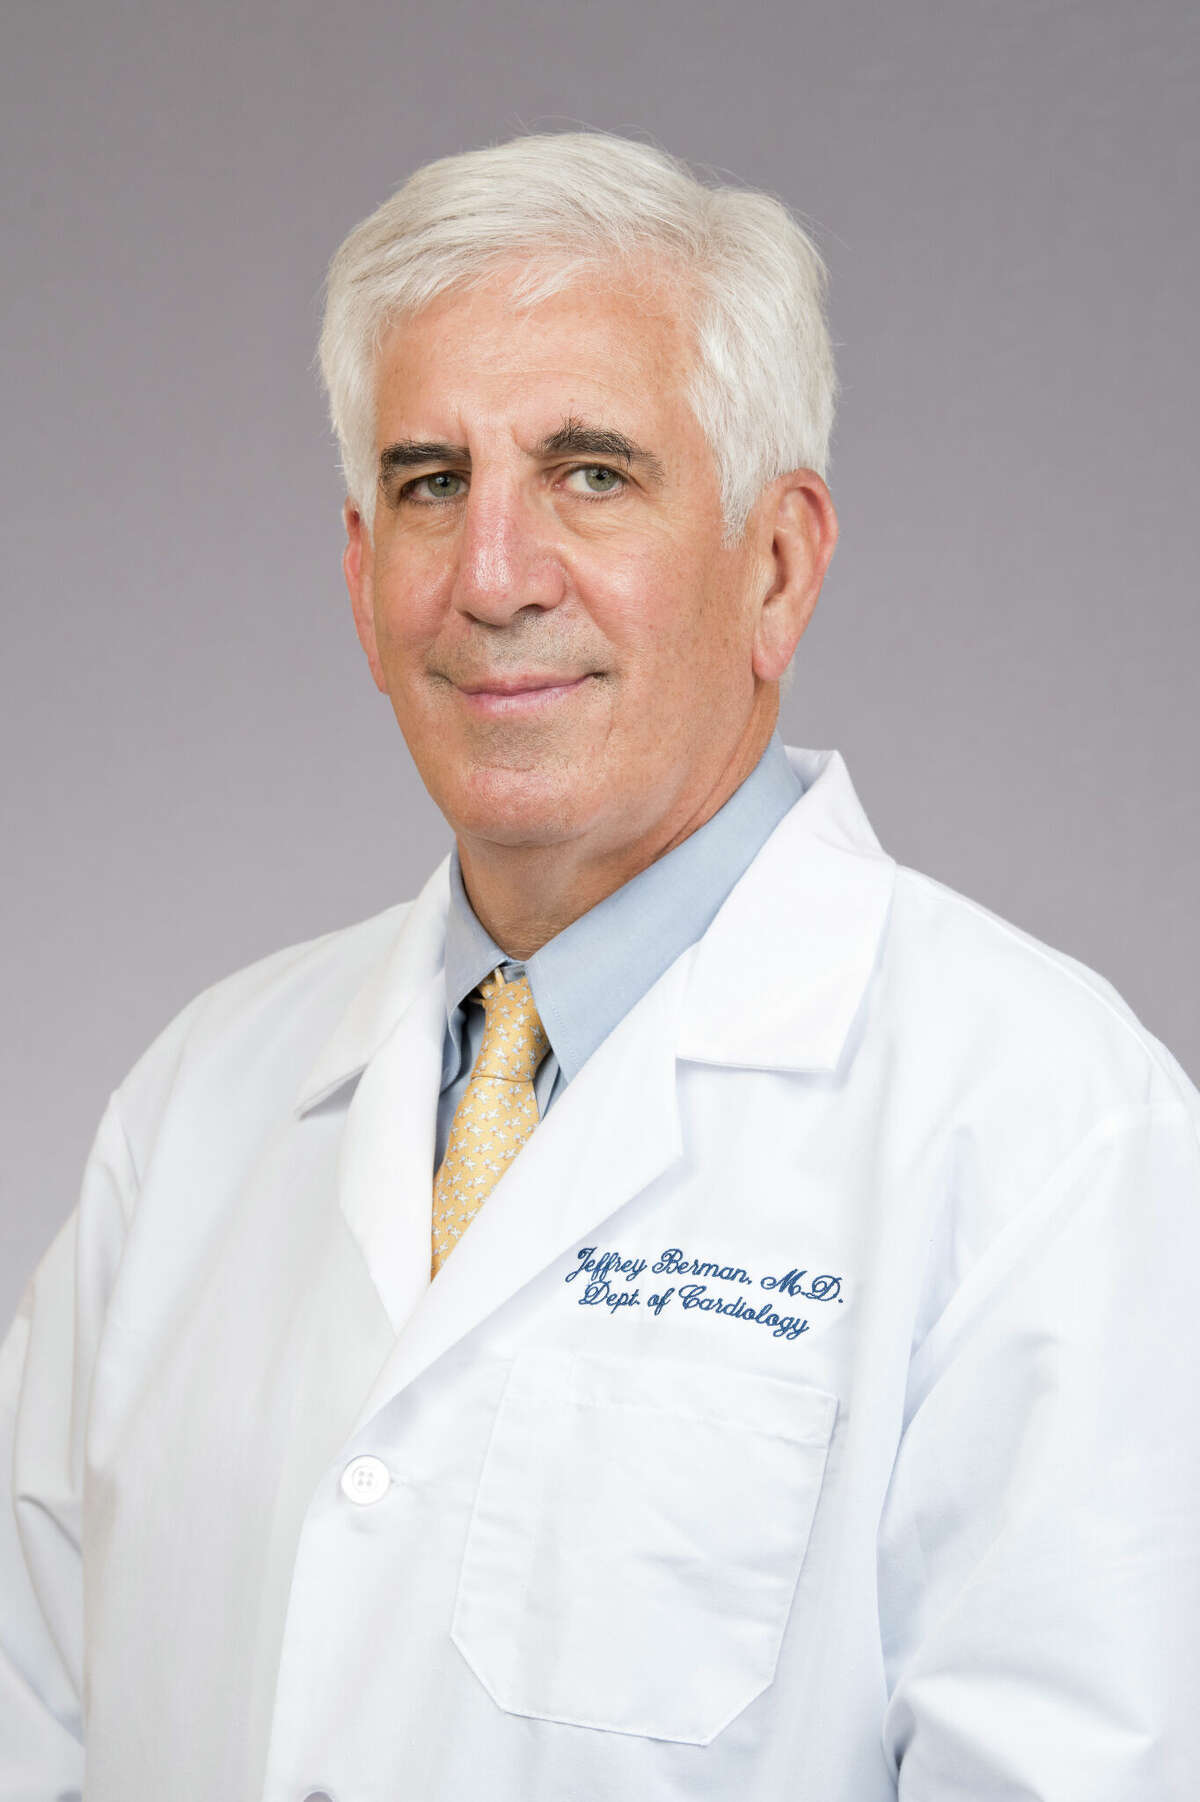 Dr. Jeffrey Berman is the chair of St. Vincent’s Medical Center Department of Cardiology.